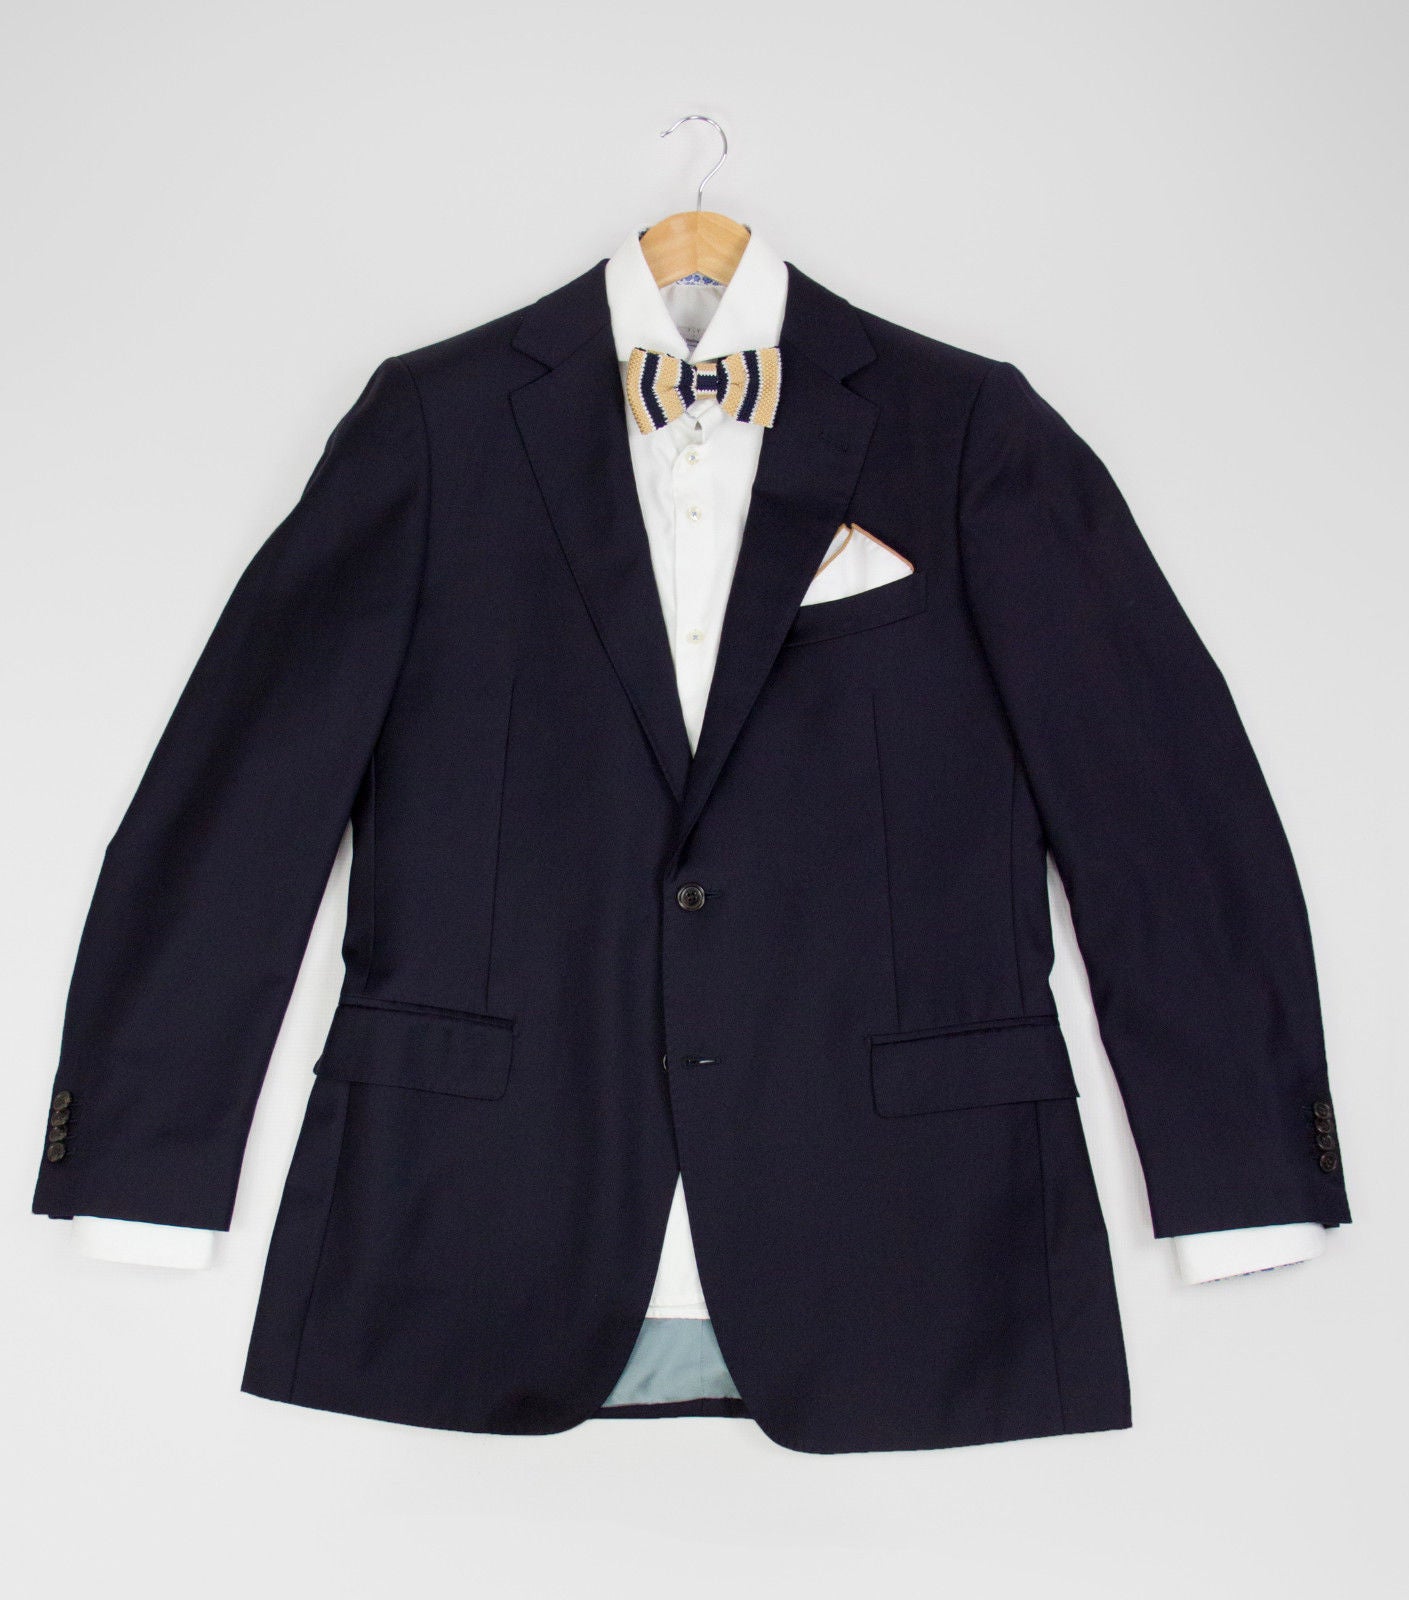 SUITSUPPLY Navy Blue Pure Wool Super 110's Blazer Jacket, USA 42 L - secondfirst